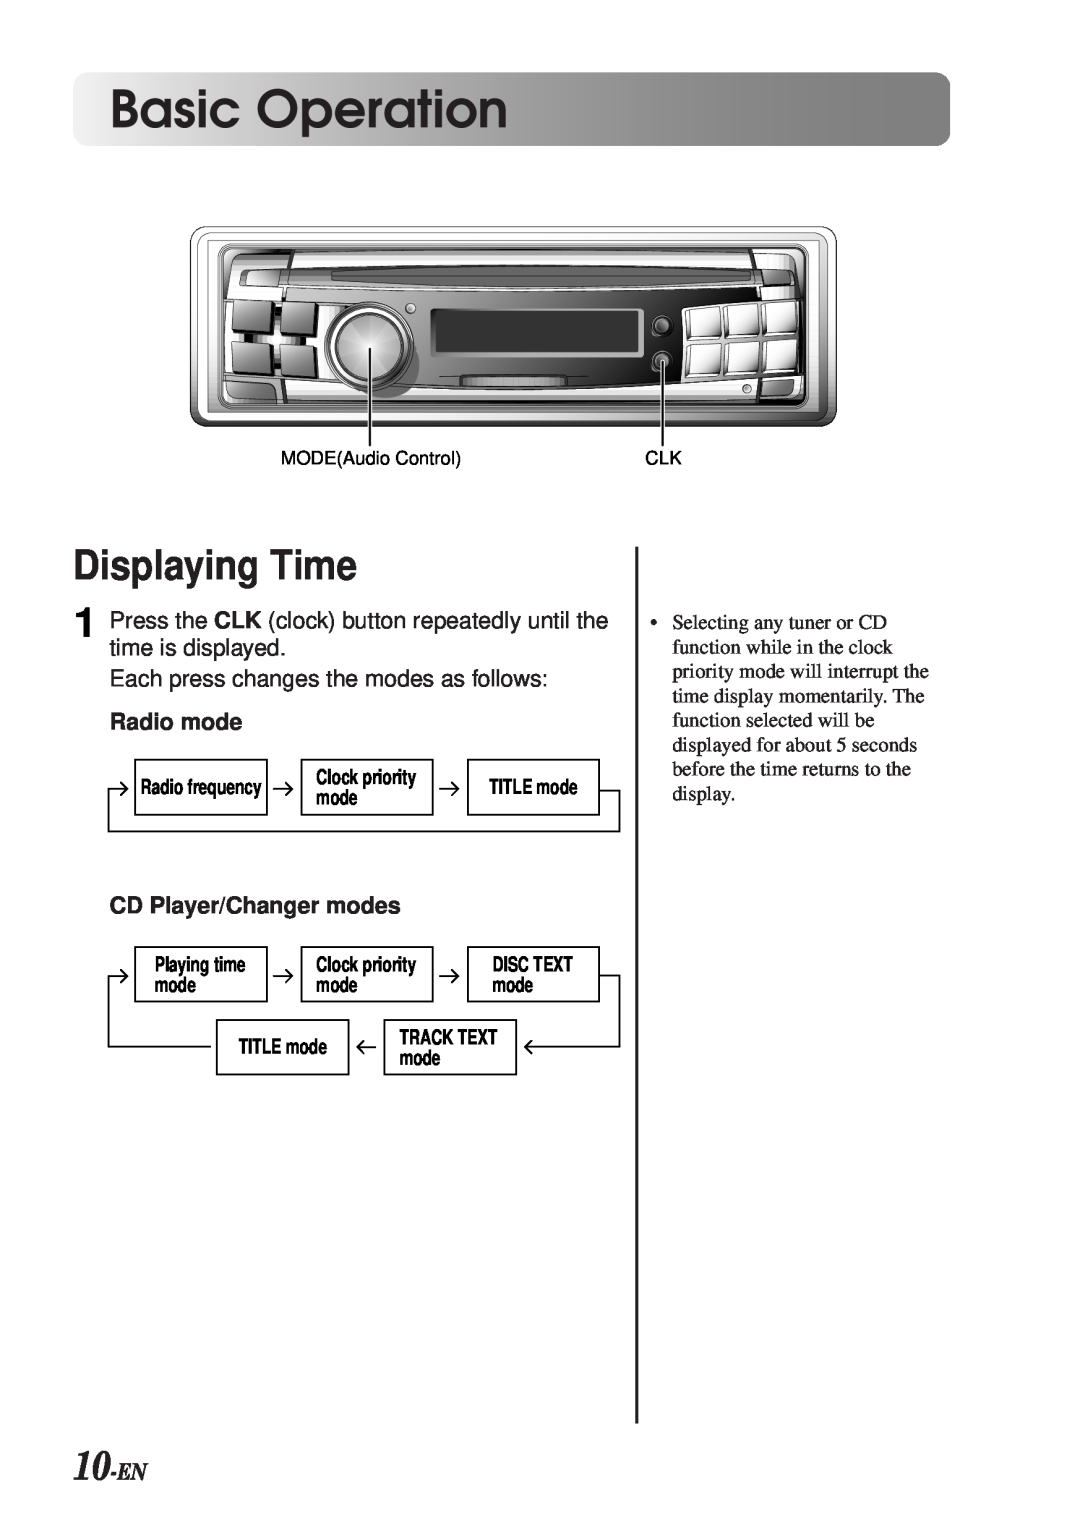 Alpine CDA-7990 Displaying Time, 10-EN, Radio mode, CD Player/Changer modes, Basic Operation, Radio frequency, Disc Text 